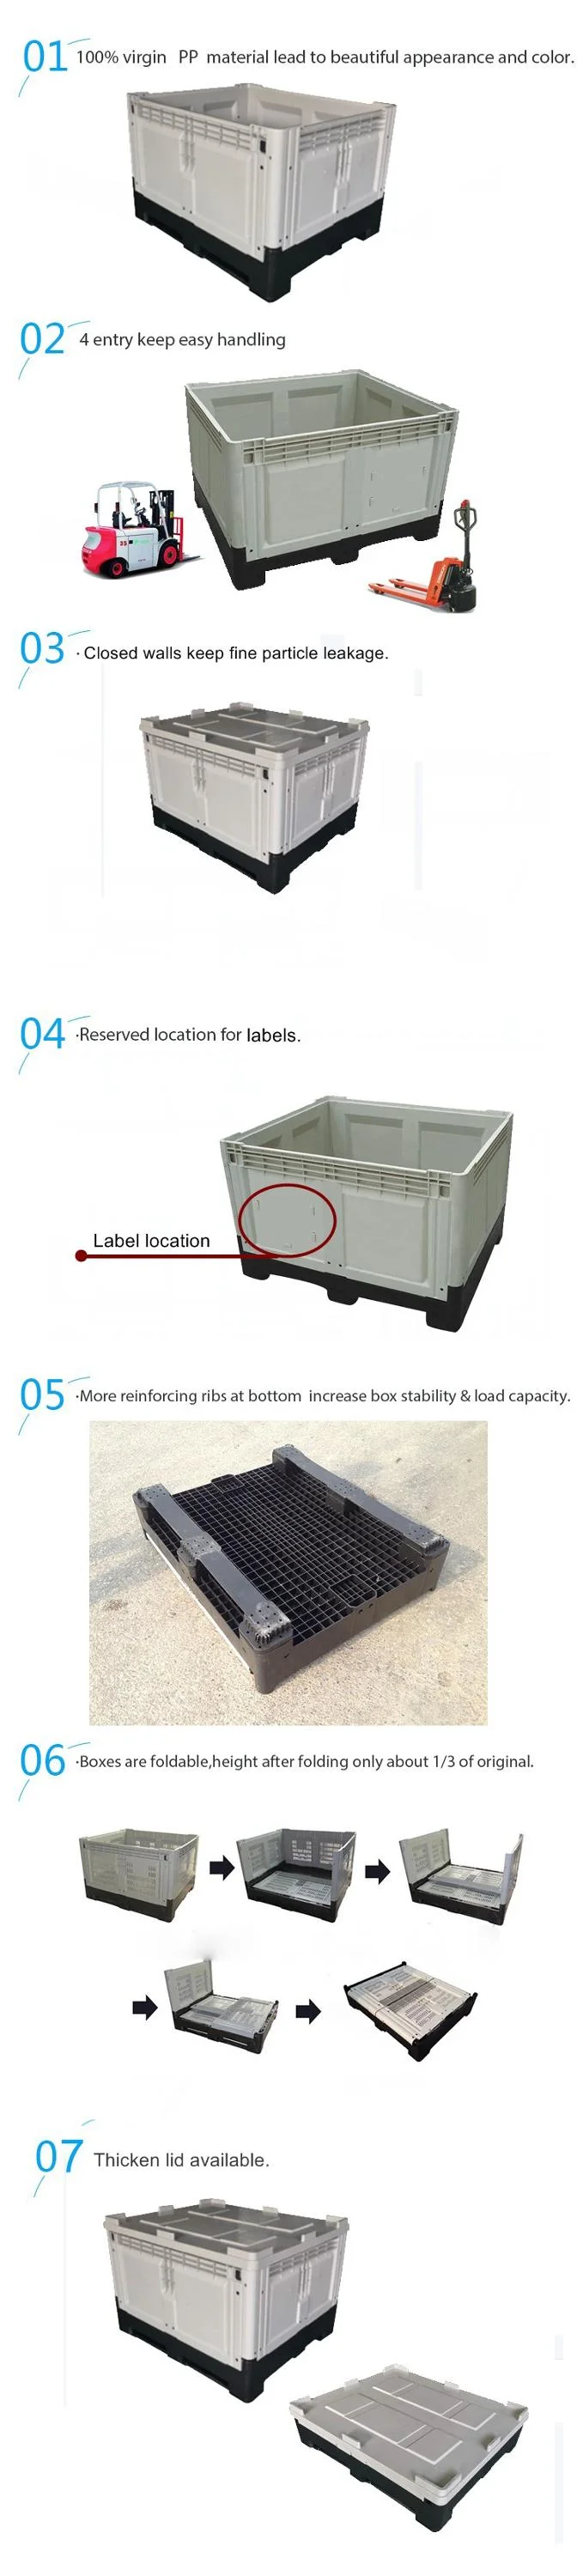 Stackable Box Plastic Containers Collapsible Plastic Pallet Storage Bins